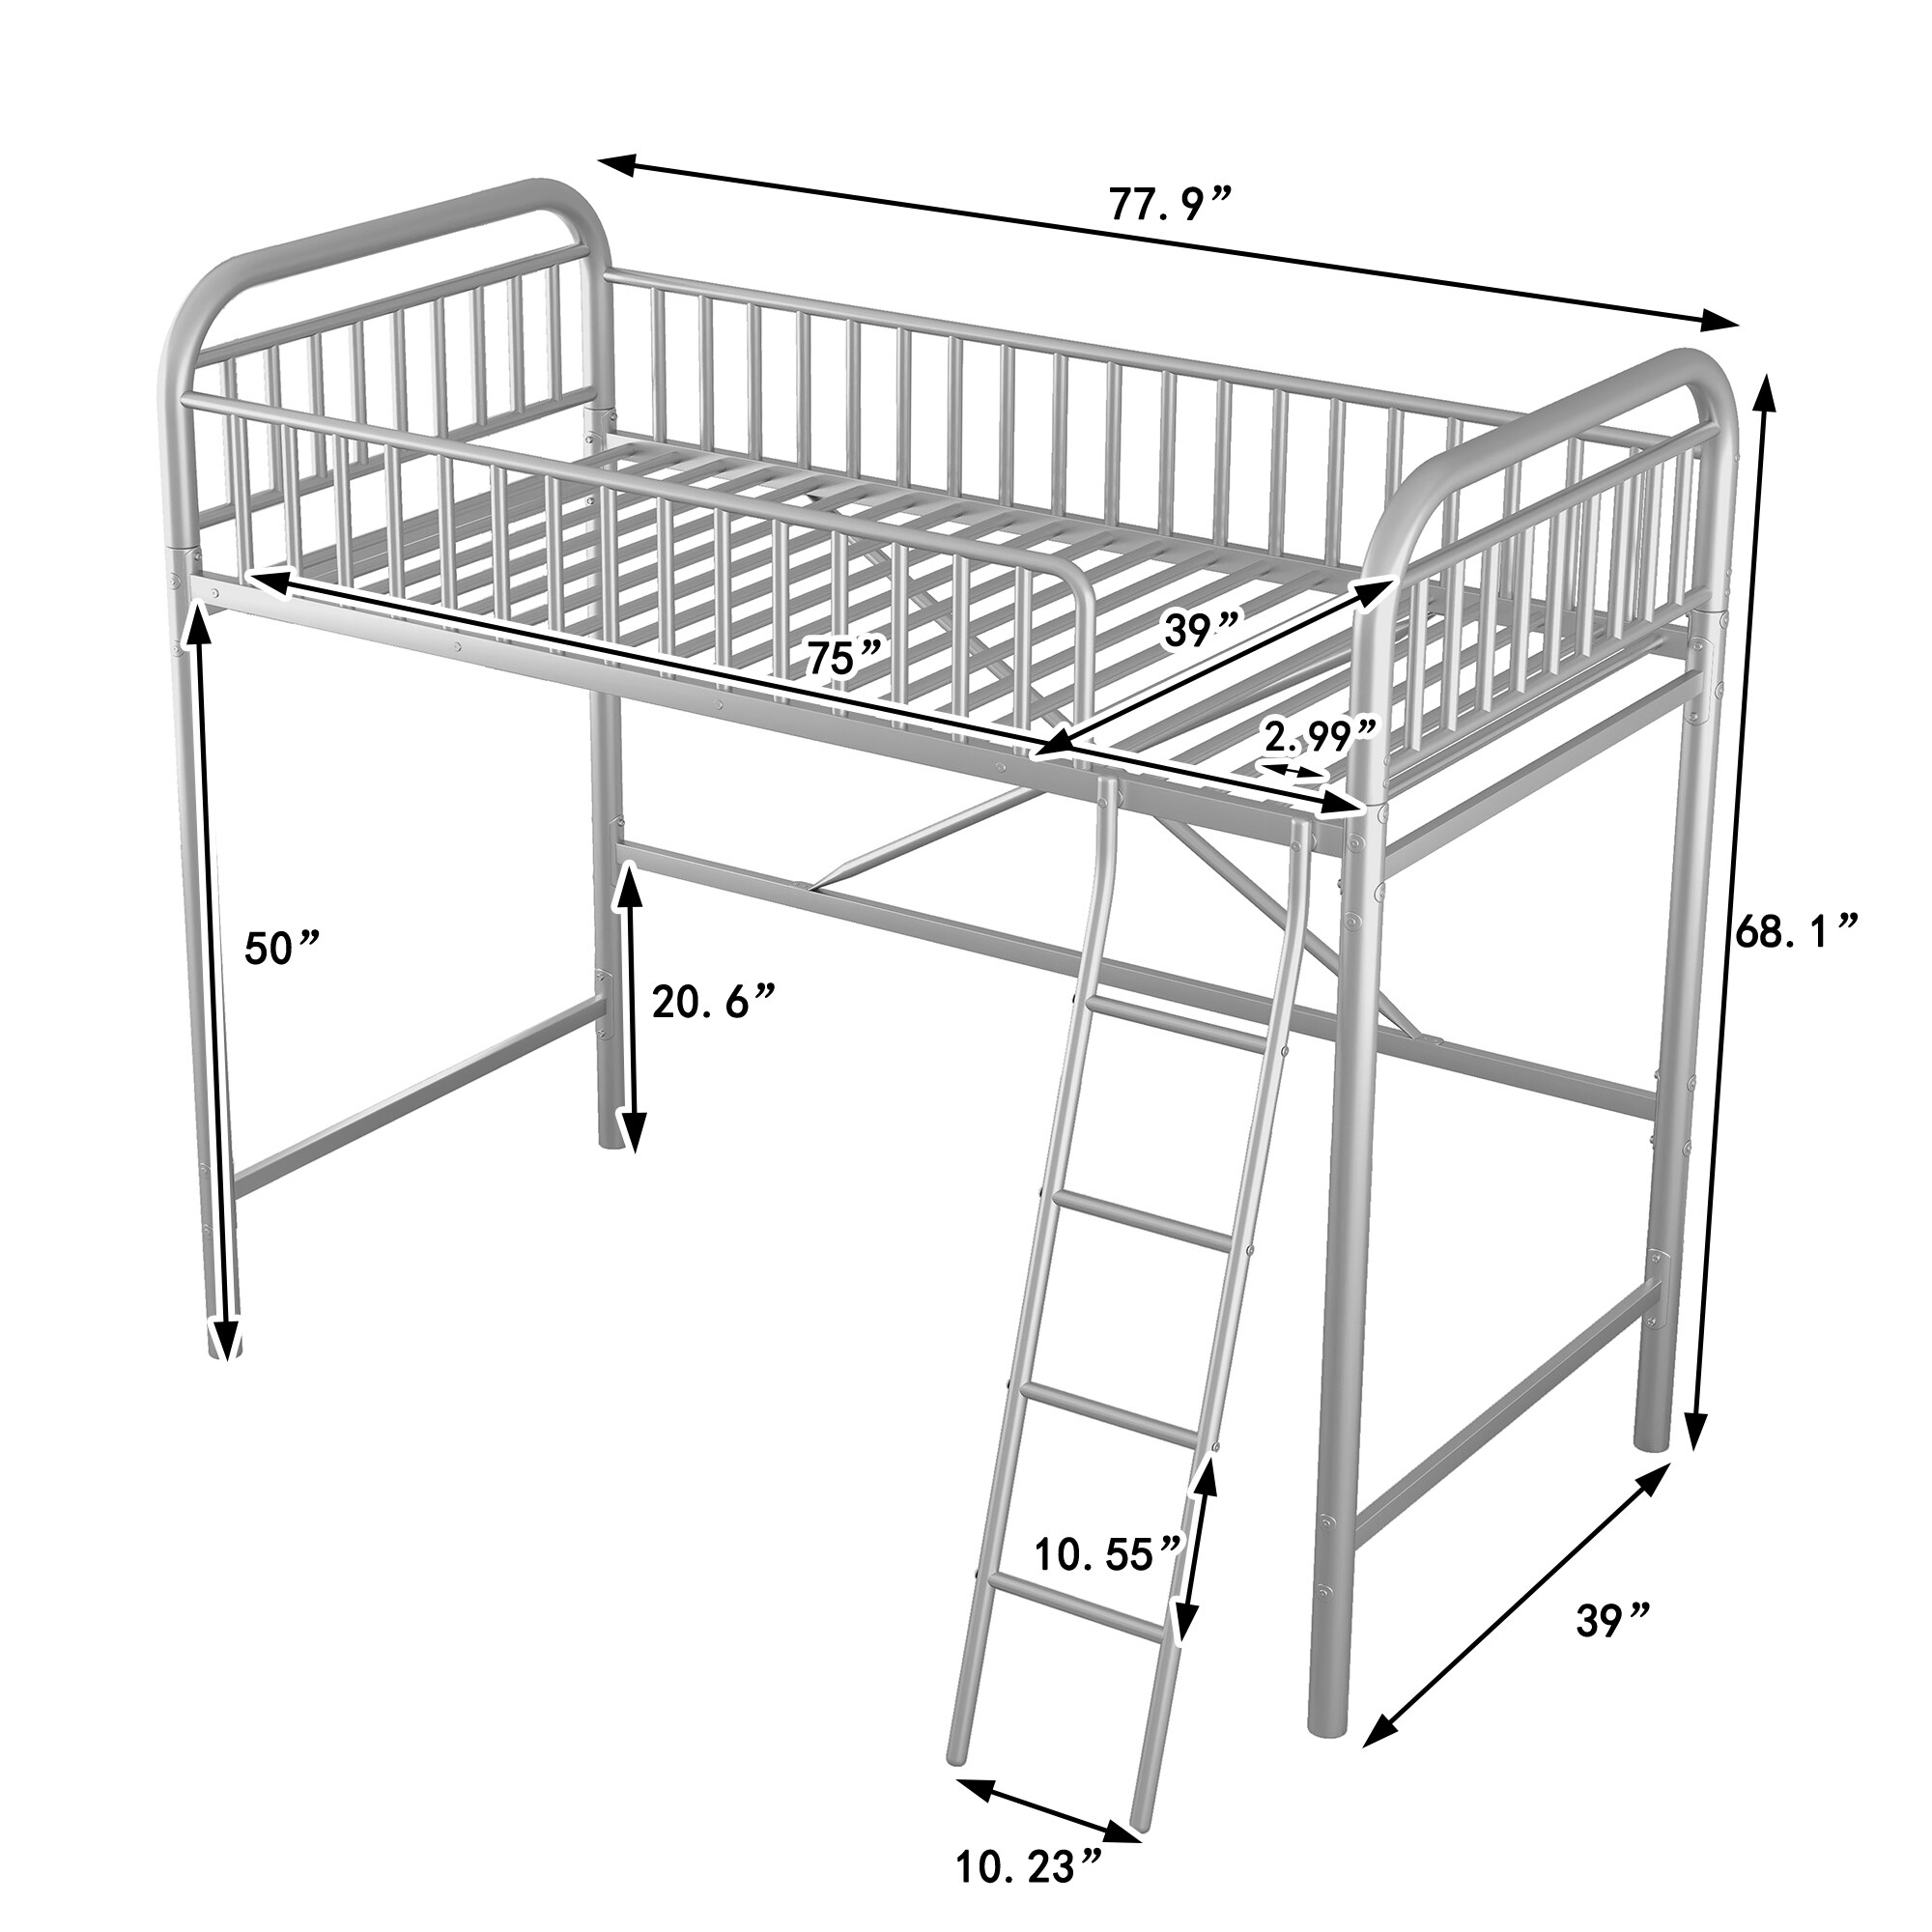 CASAINC Contemporary Twin Loft Bed with Ladder, Silver, Space-Saving ...